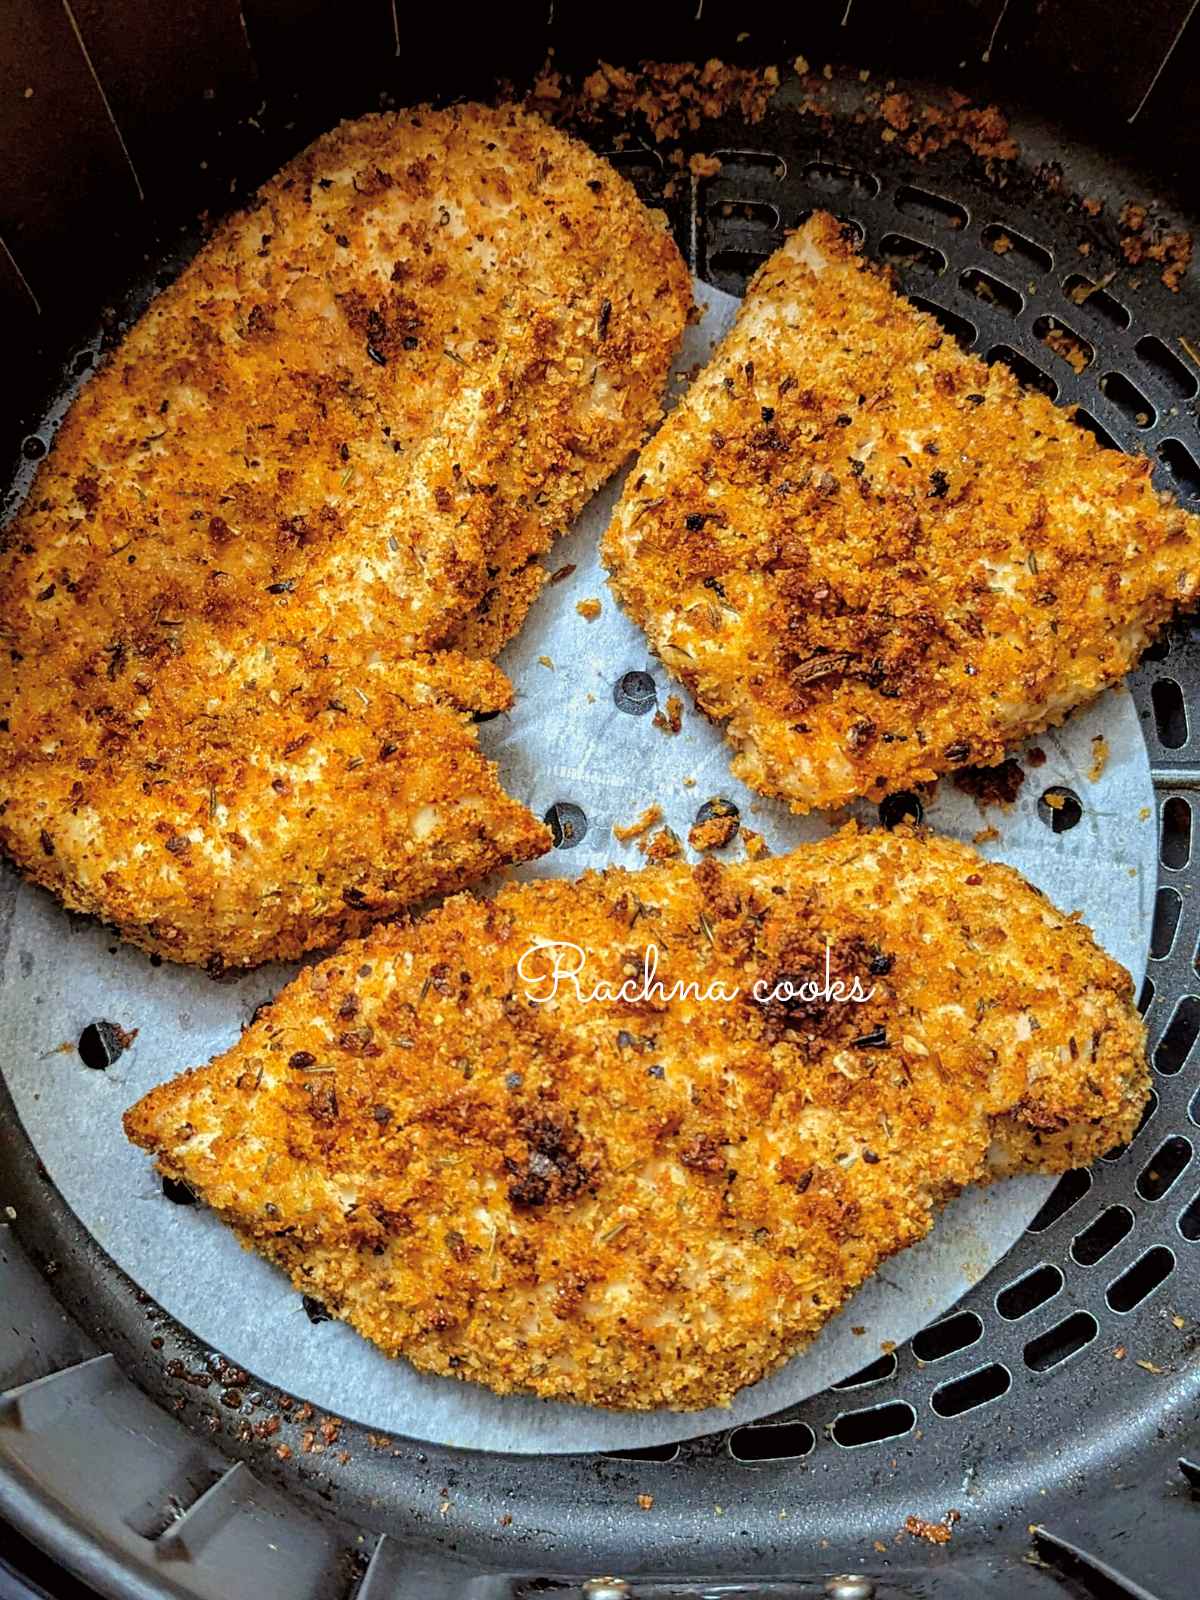 3 shake and bake chicken breasts after air frying placed in air fryer basket.